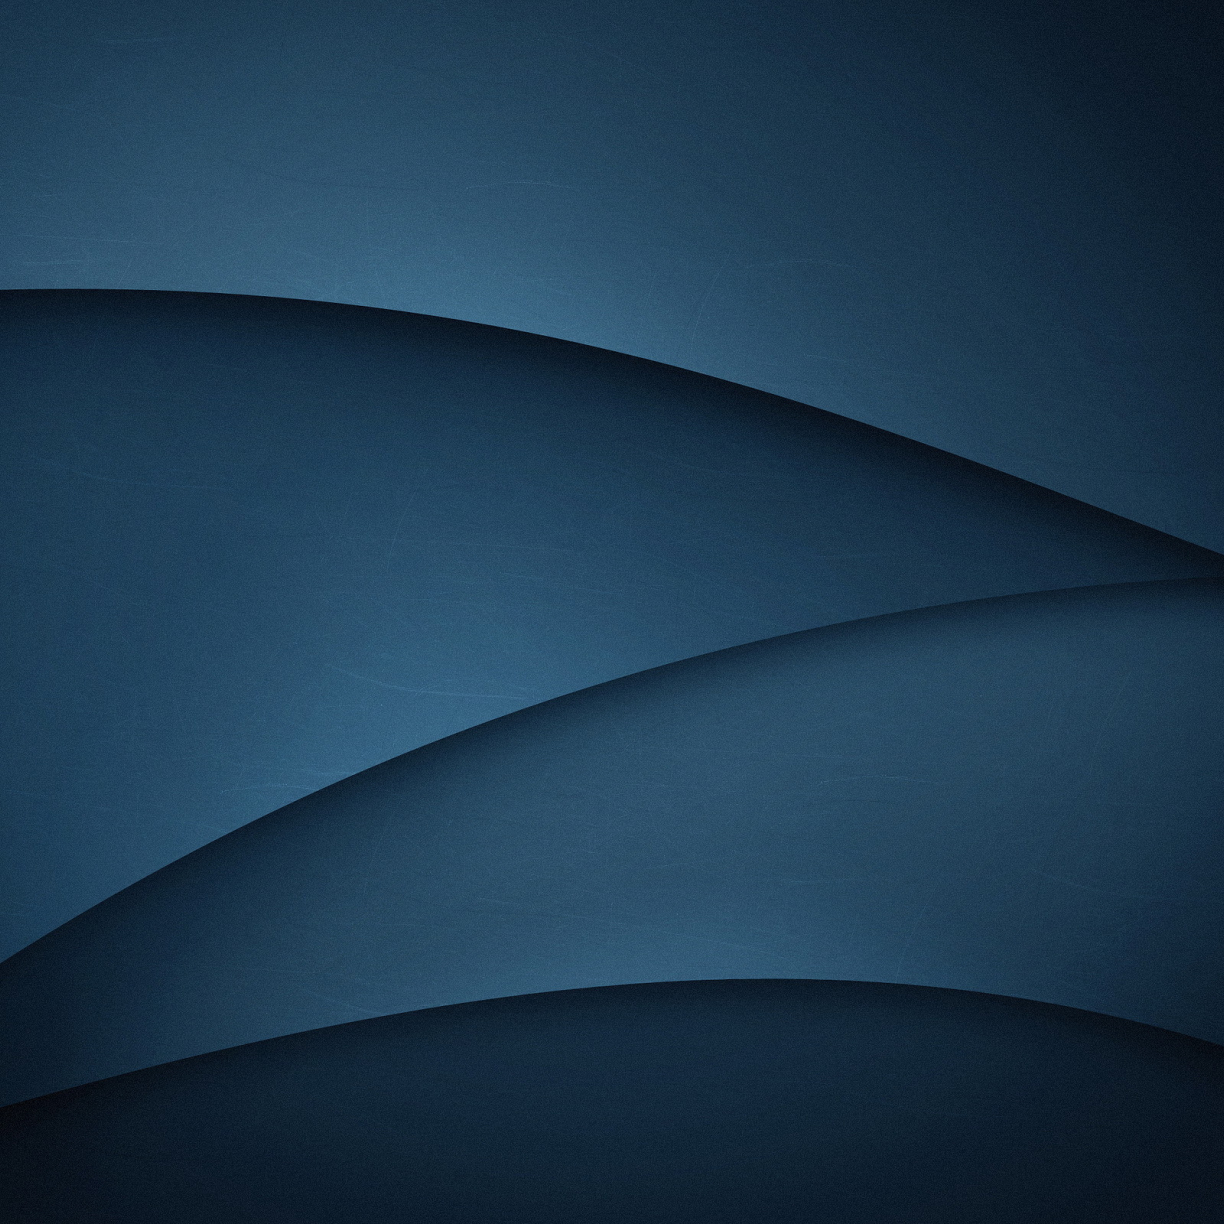 16 Stunning Aesthetics Wallpapers for iPad Free Download